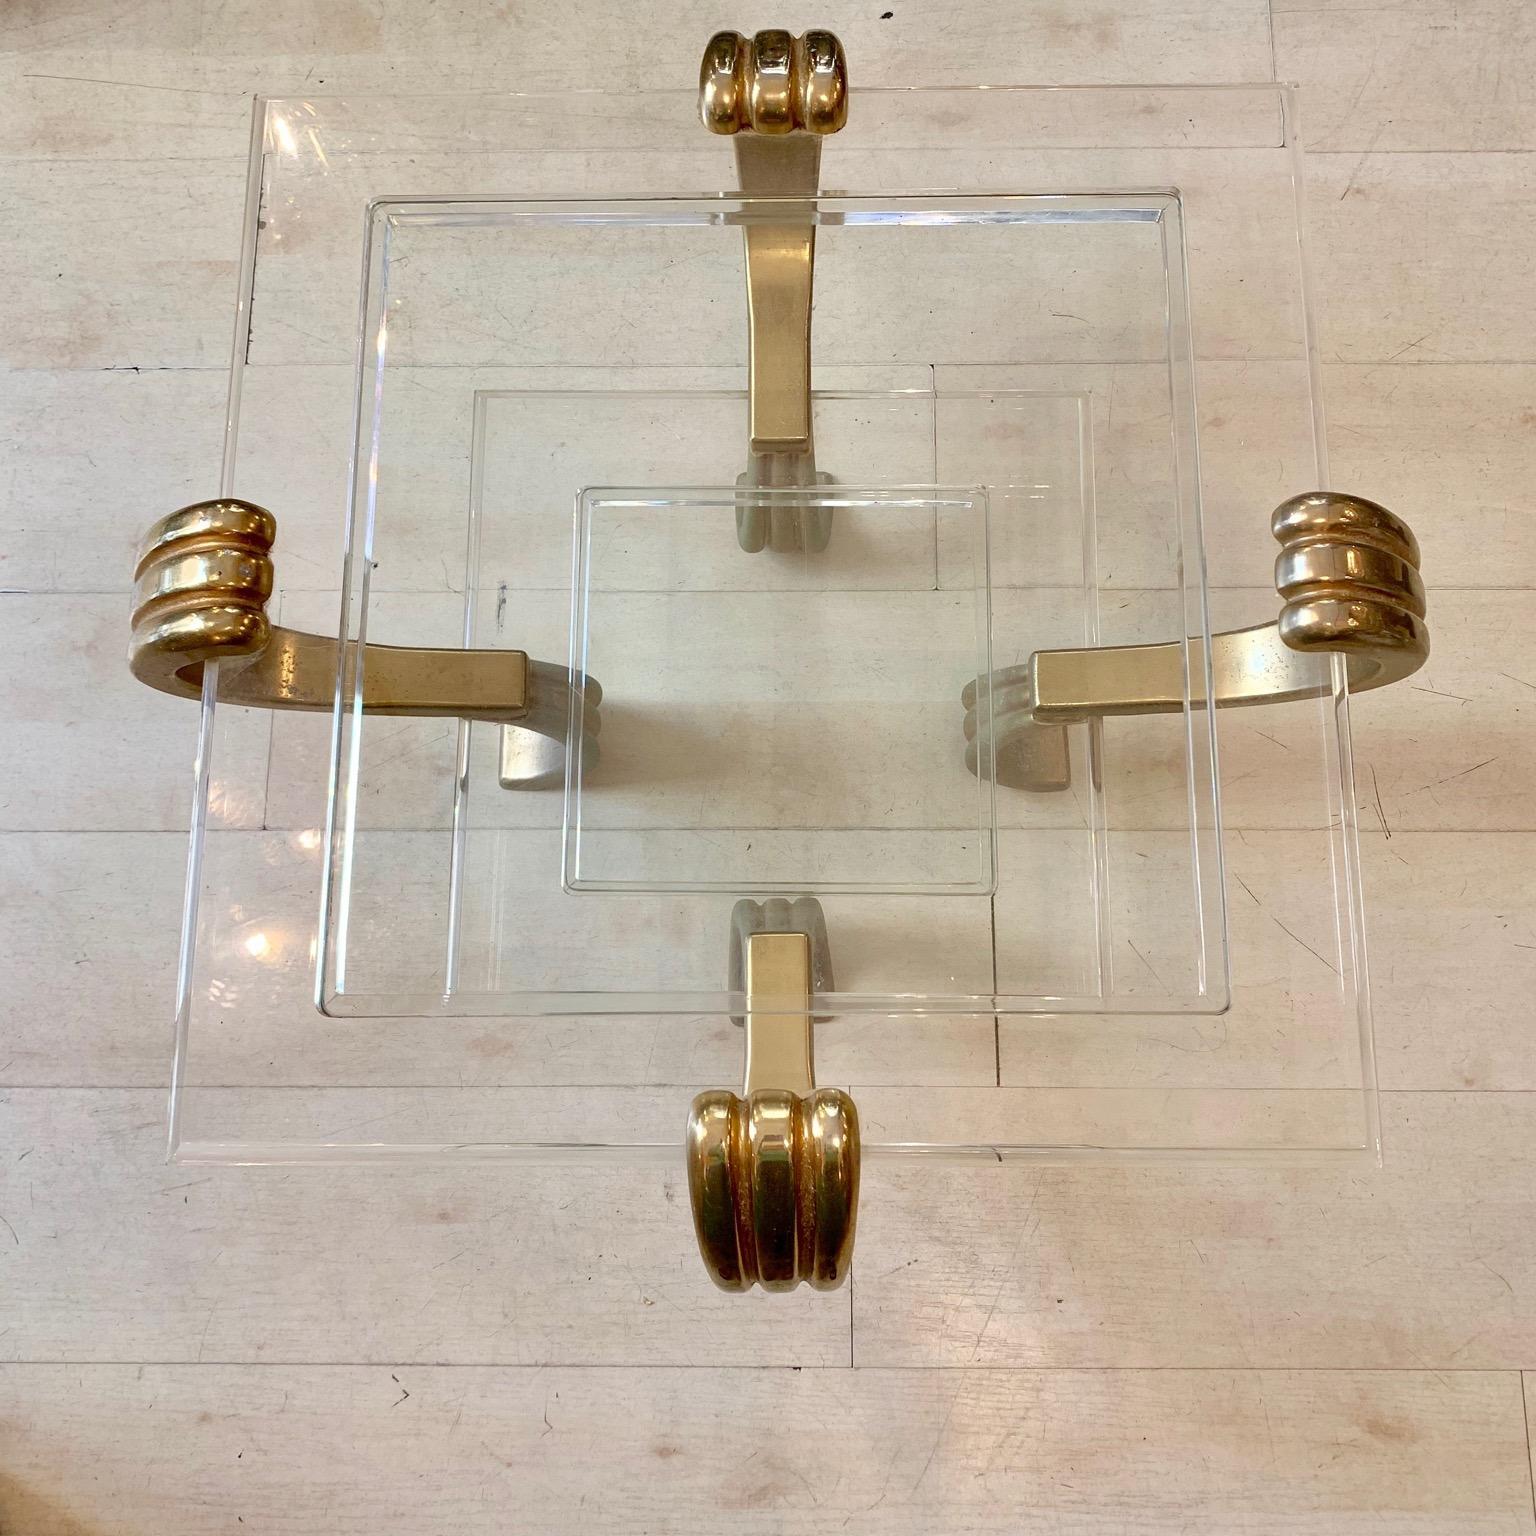 Art Deco plexiglass and brass coffee table, the structure is made of plexiglass, the two shelves are in clear glass. The decorative supports are in golden brass.
The brass has its original patina and presents signs of age and use.